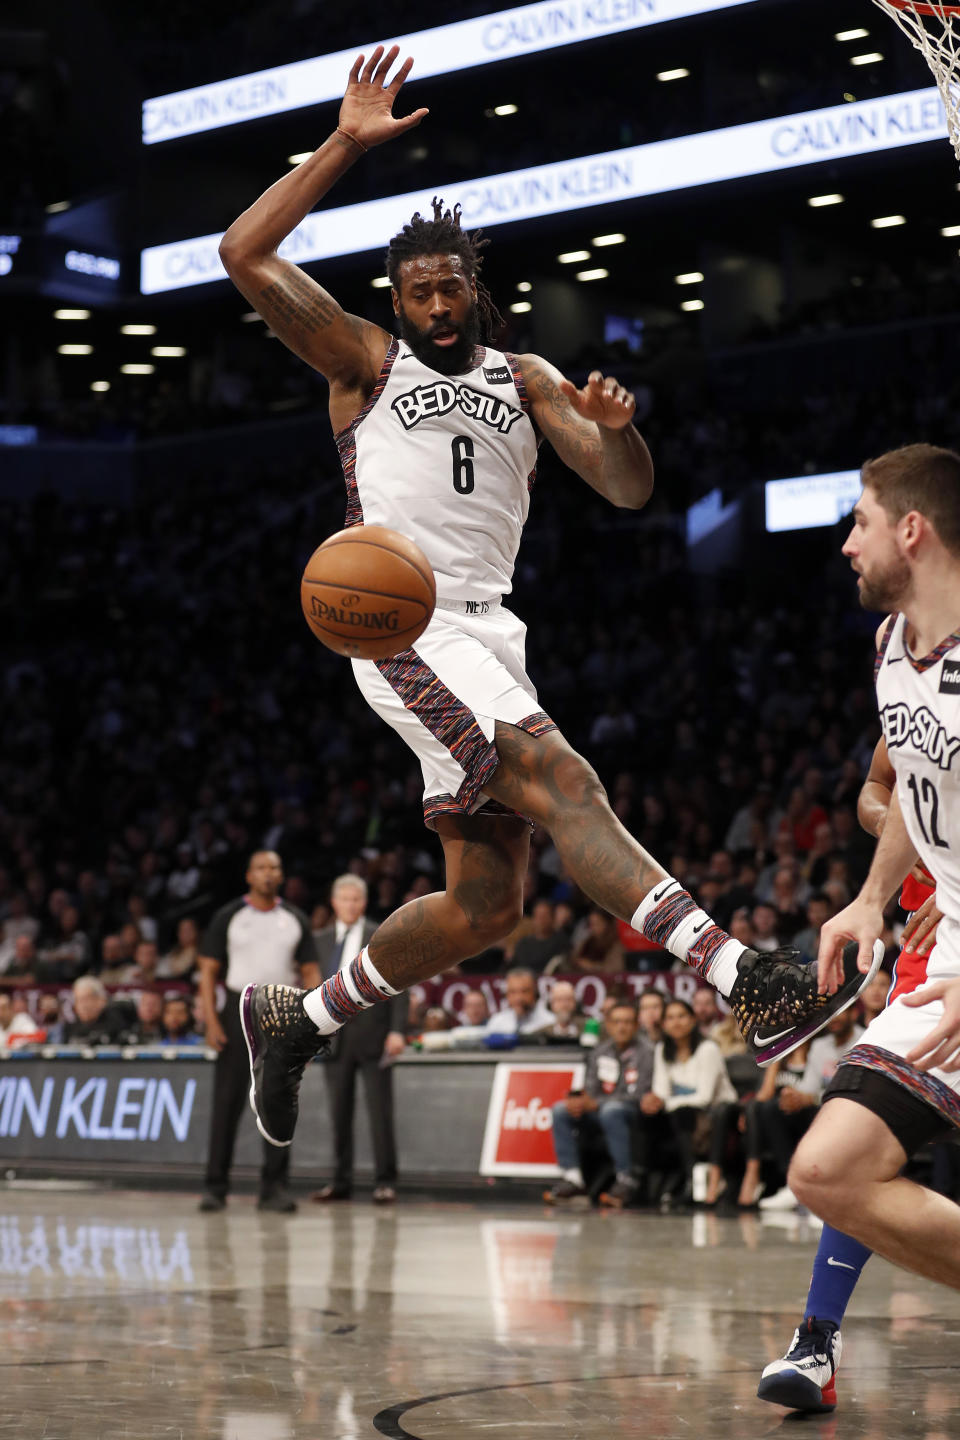 Brooklyn Nets guard Spencer Dinwiddie (8) leaps for the ball during the second quarter of an NBA basketball game against the Philadelphia 76ers at Barclays Center, Sunday, Dec. 15, 2019, in New York. (AP Photo/Michael Owens)